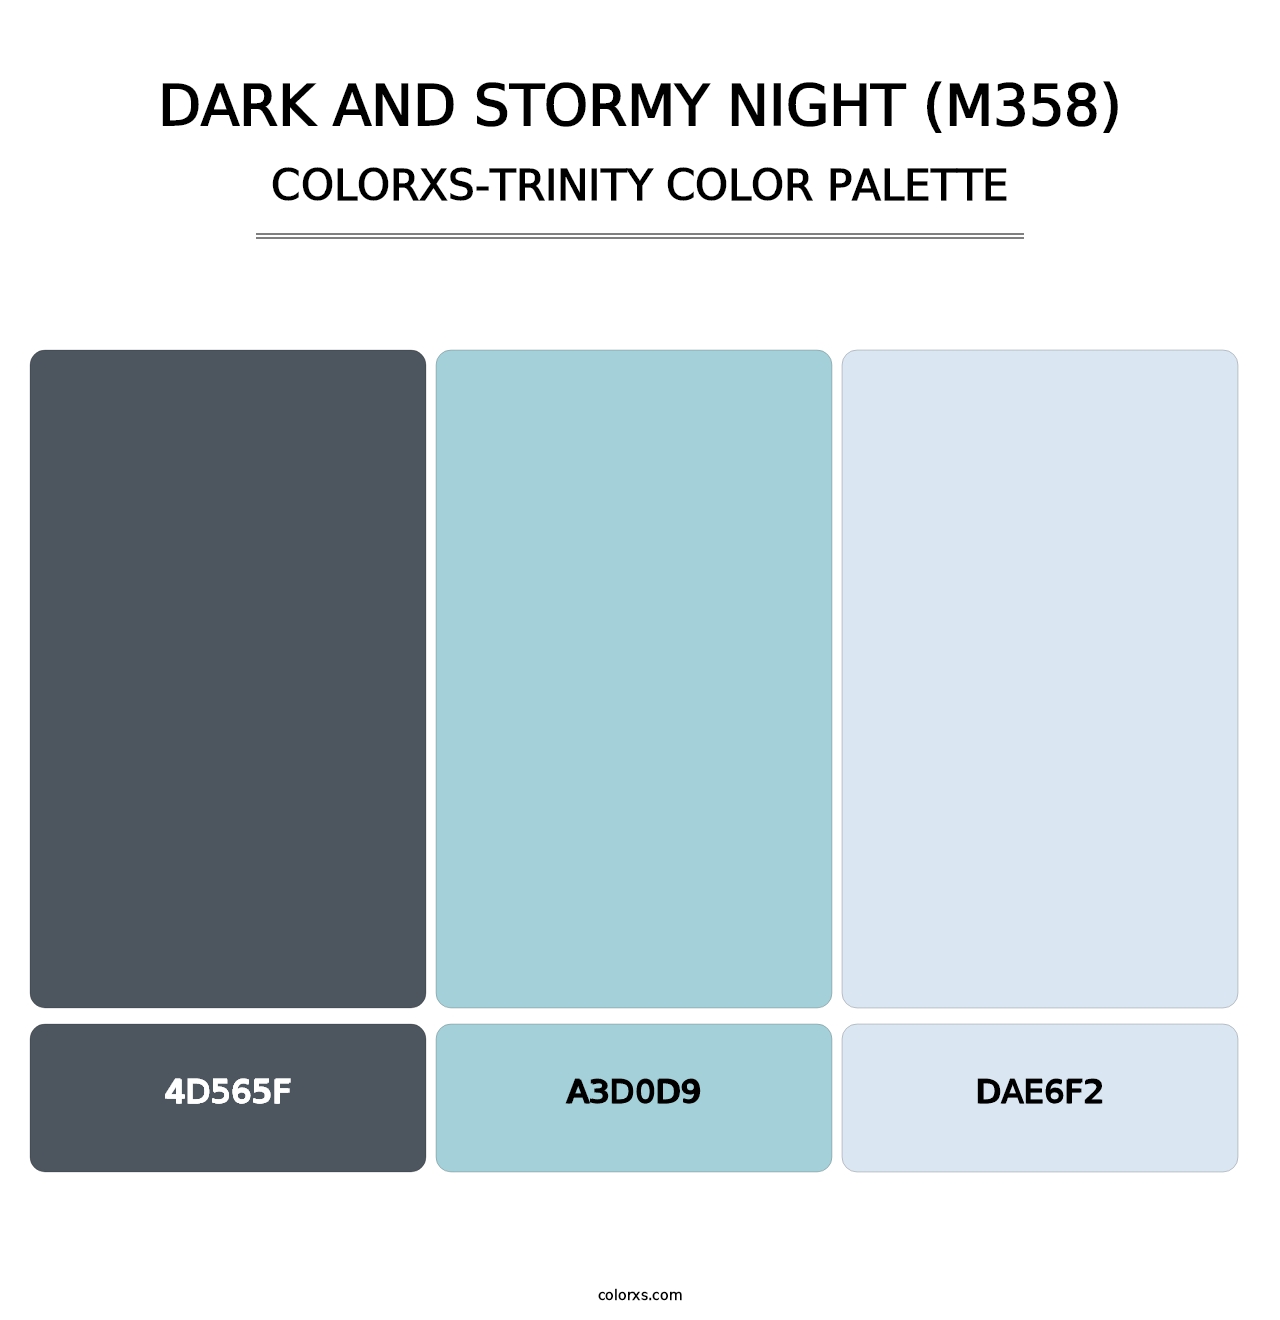 Dark and Stormy Night (M358) - Colorxs Trinity Palette